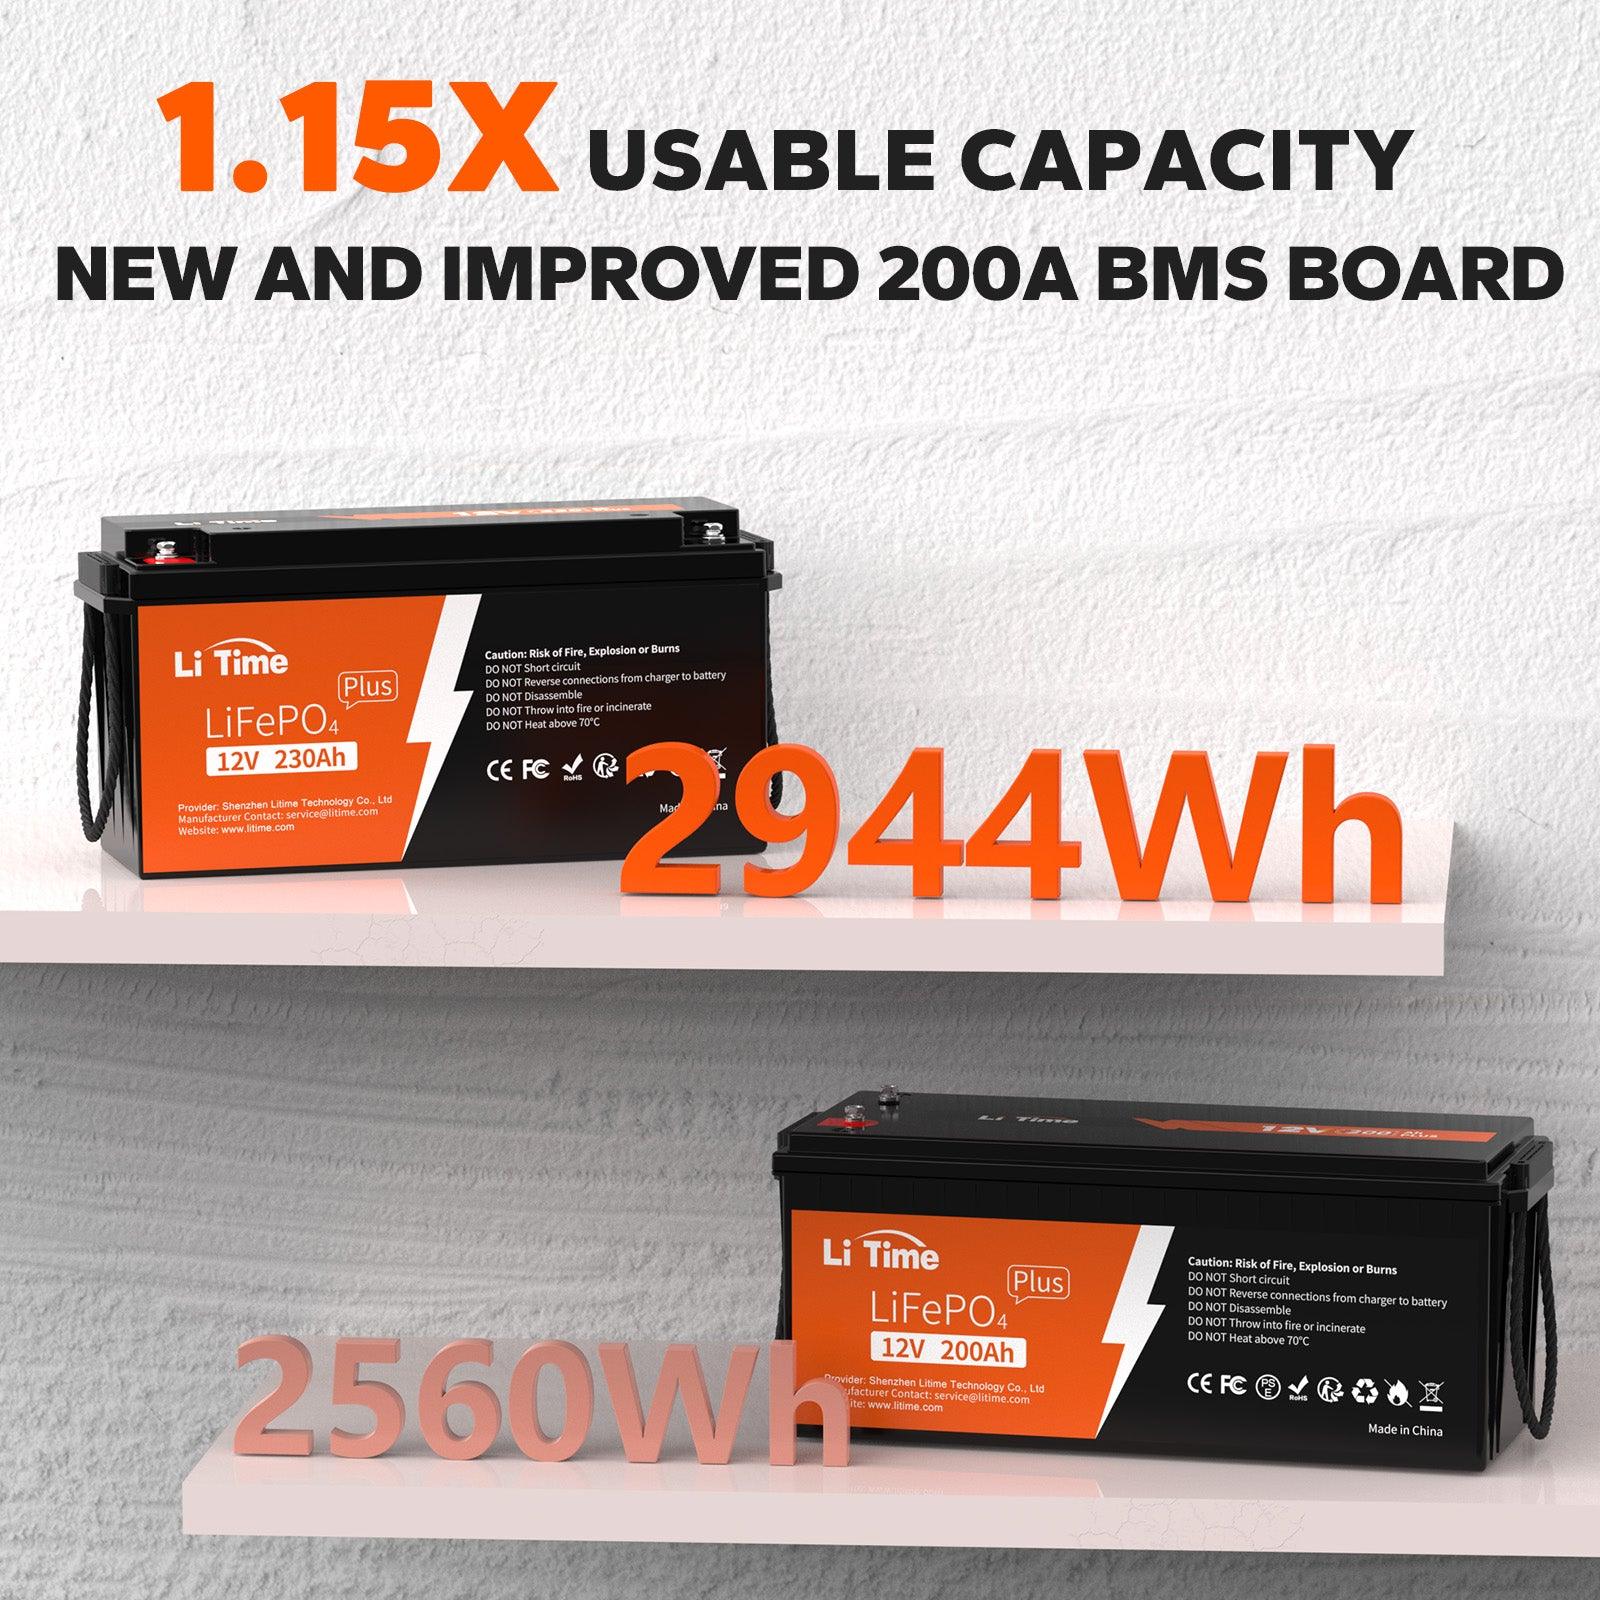 LiTime 12V 230Ah Plus Low-Temp Protection LiFePO4 Battery, Built-in 200A BMS, Max 2944Wh Energy